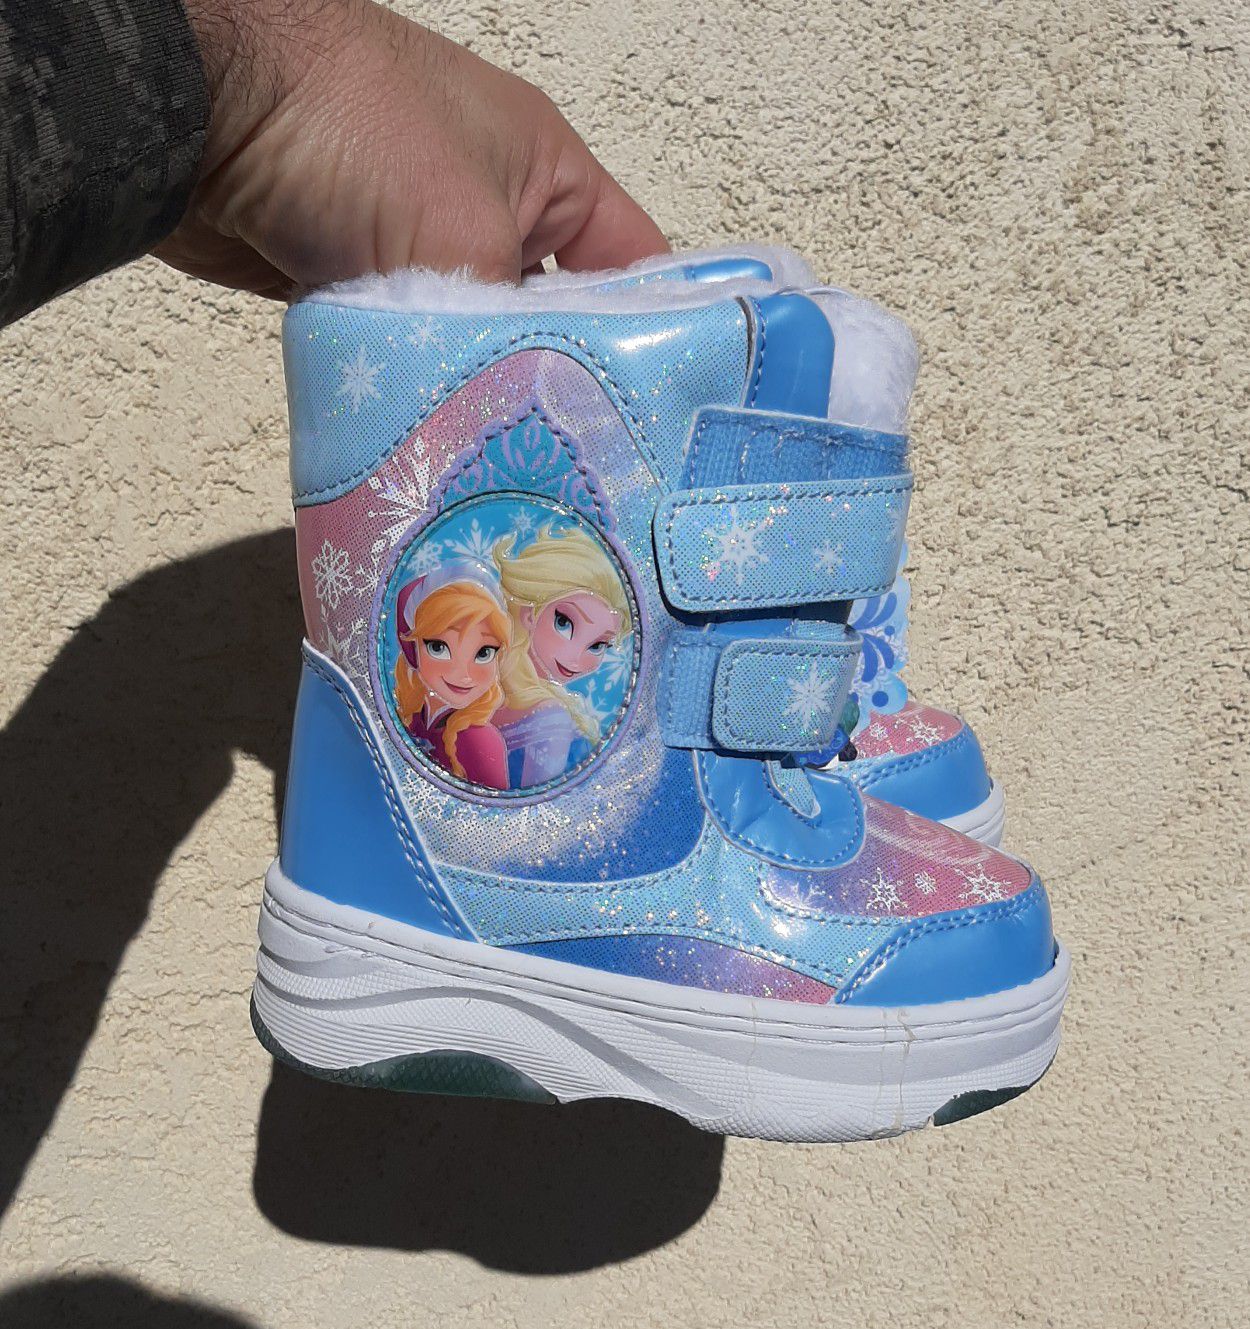 New Disney Snow boots size 7/8 for toddler